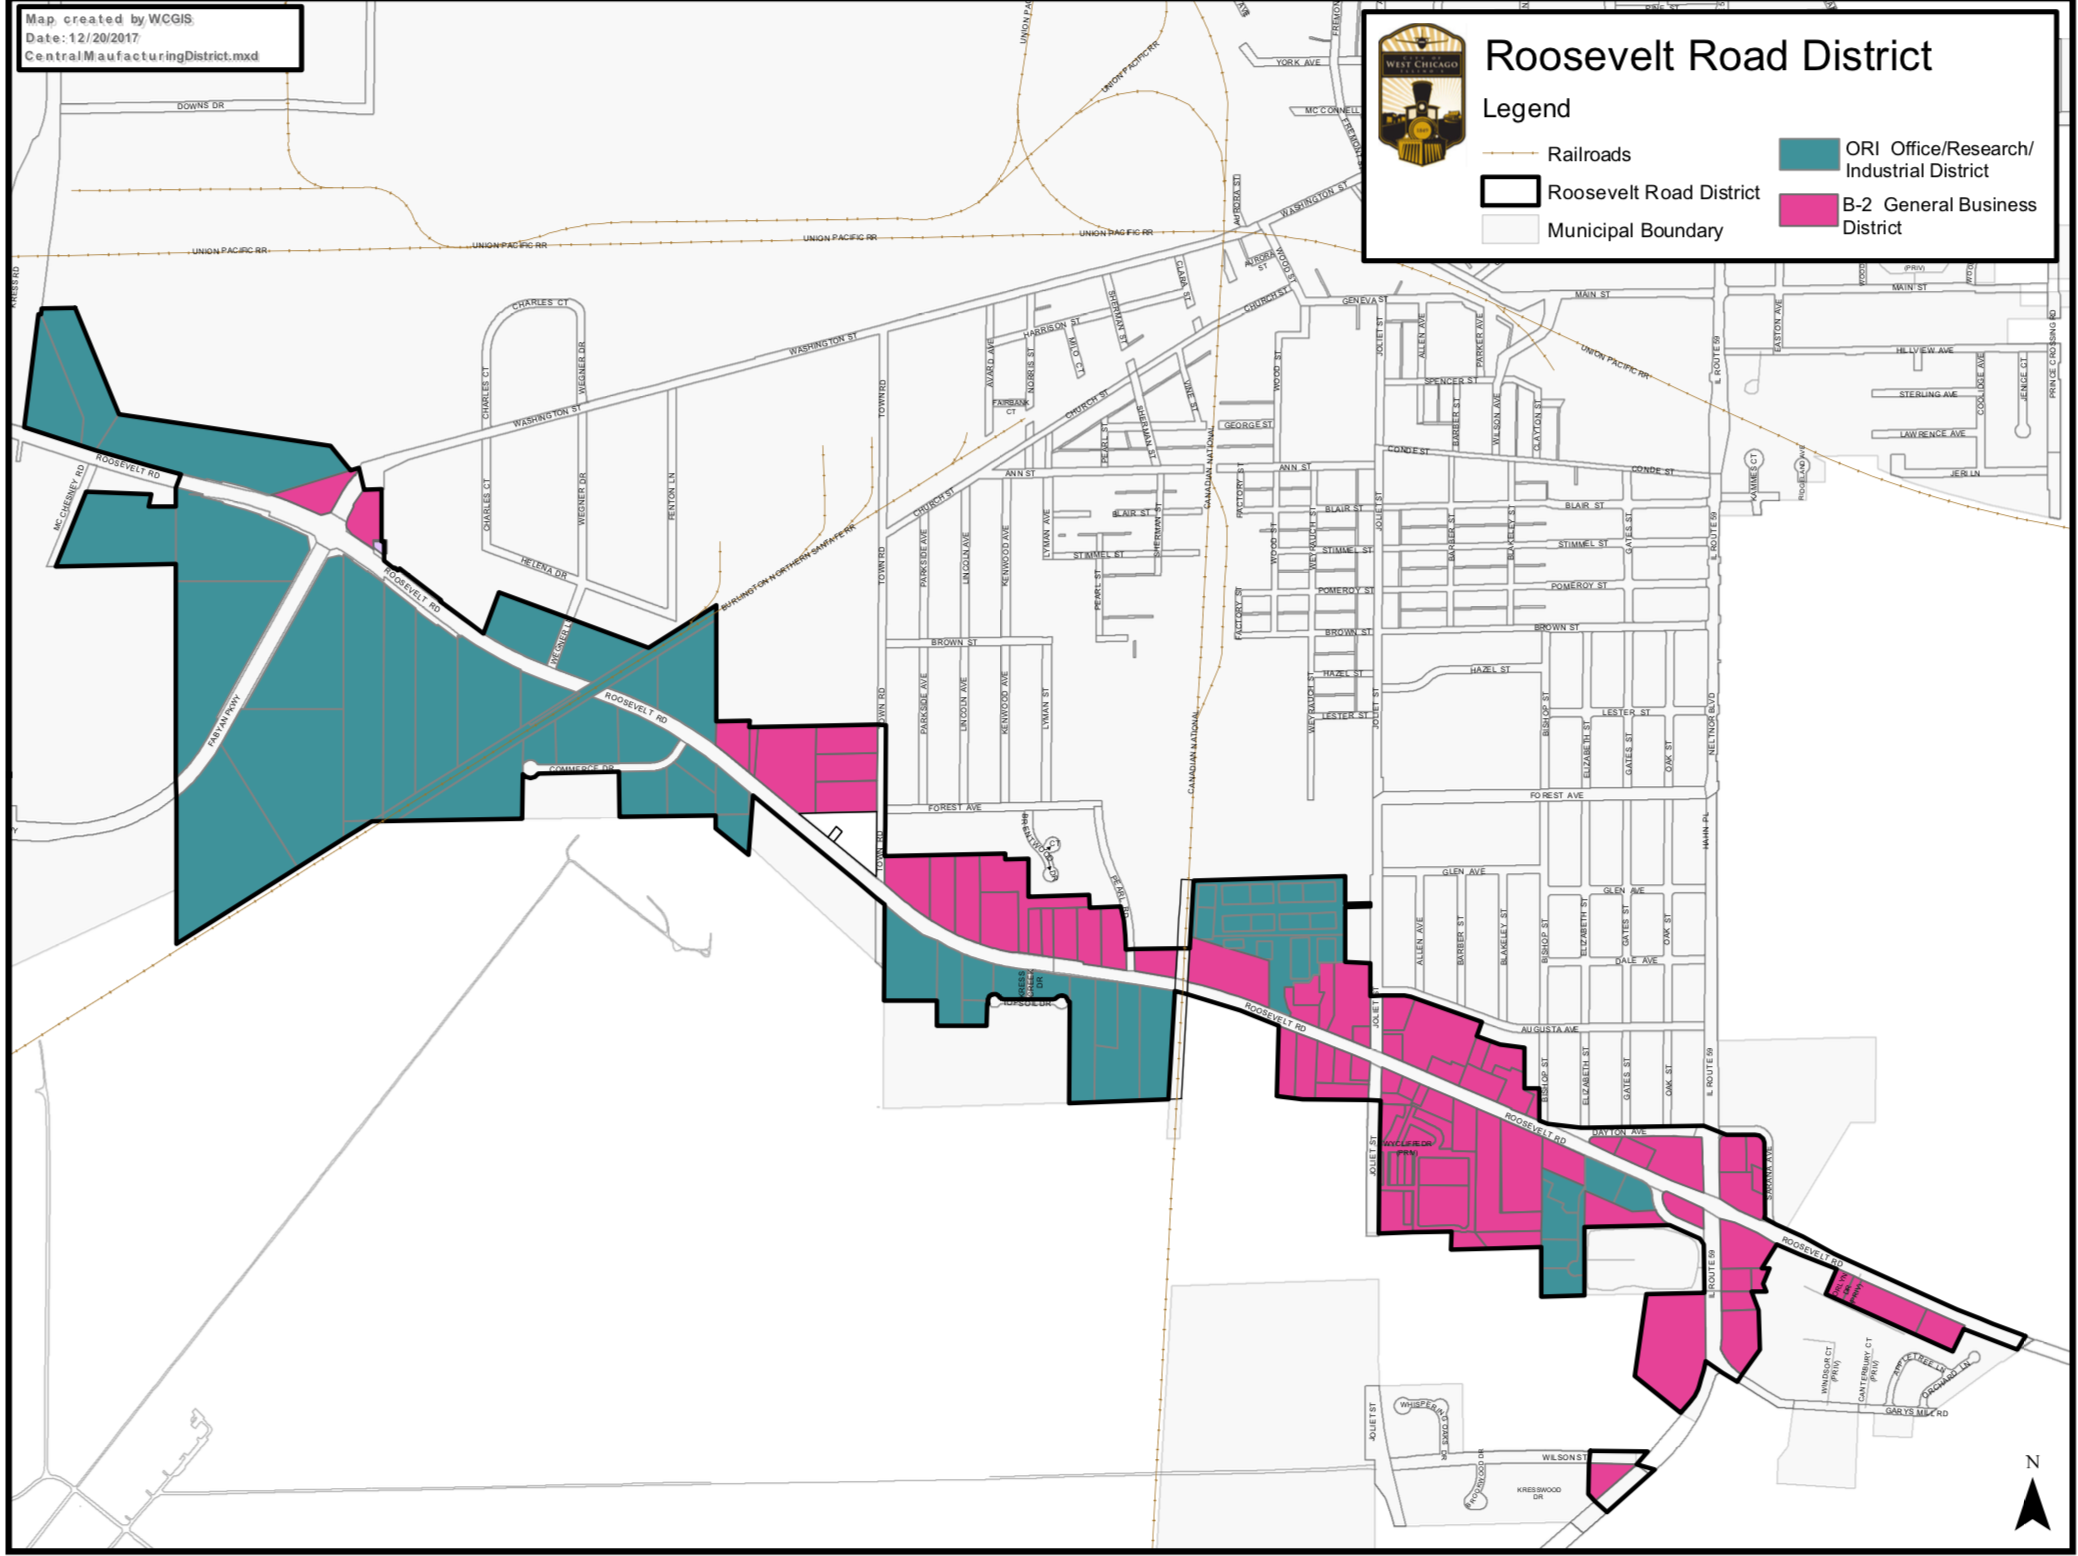 Roosevelt Road business district map